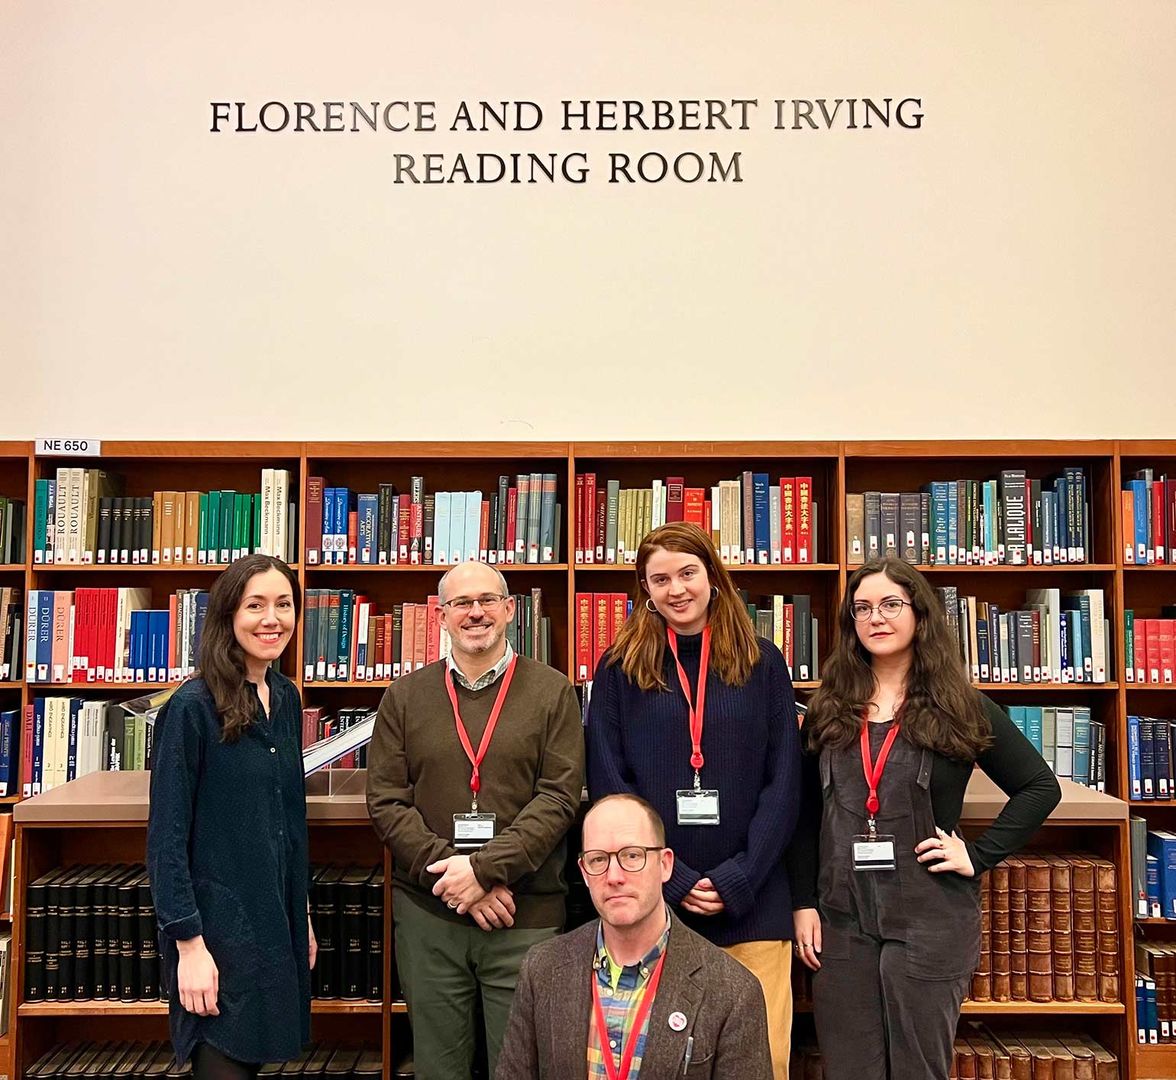 Library staff in the Reading Room